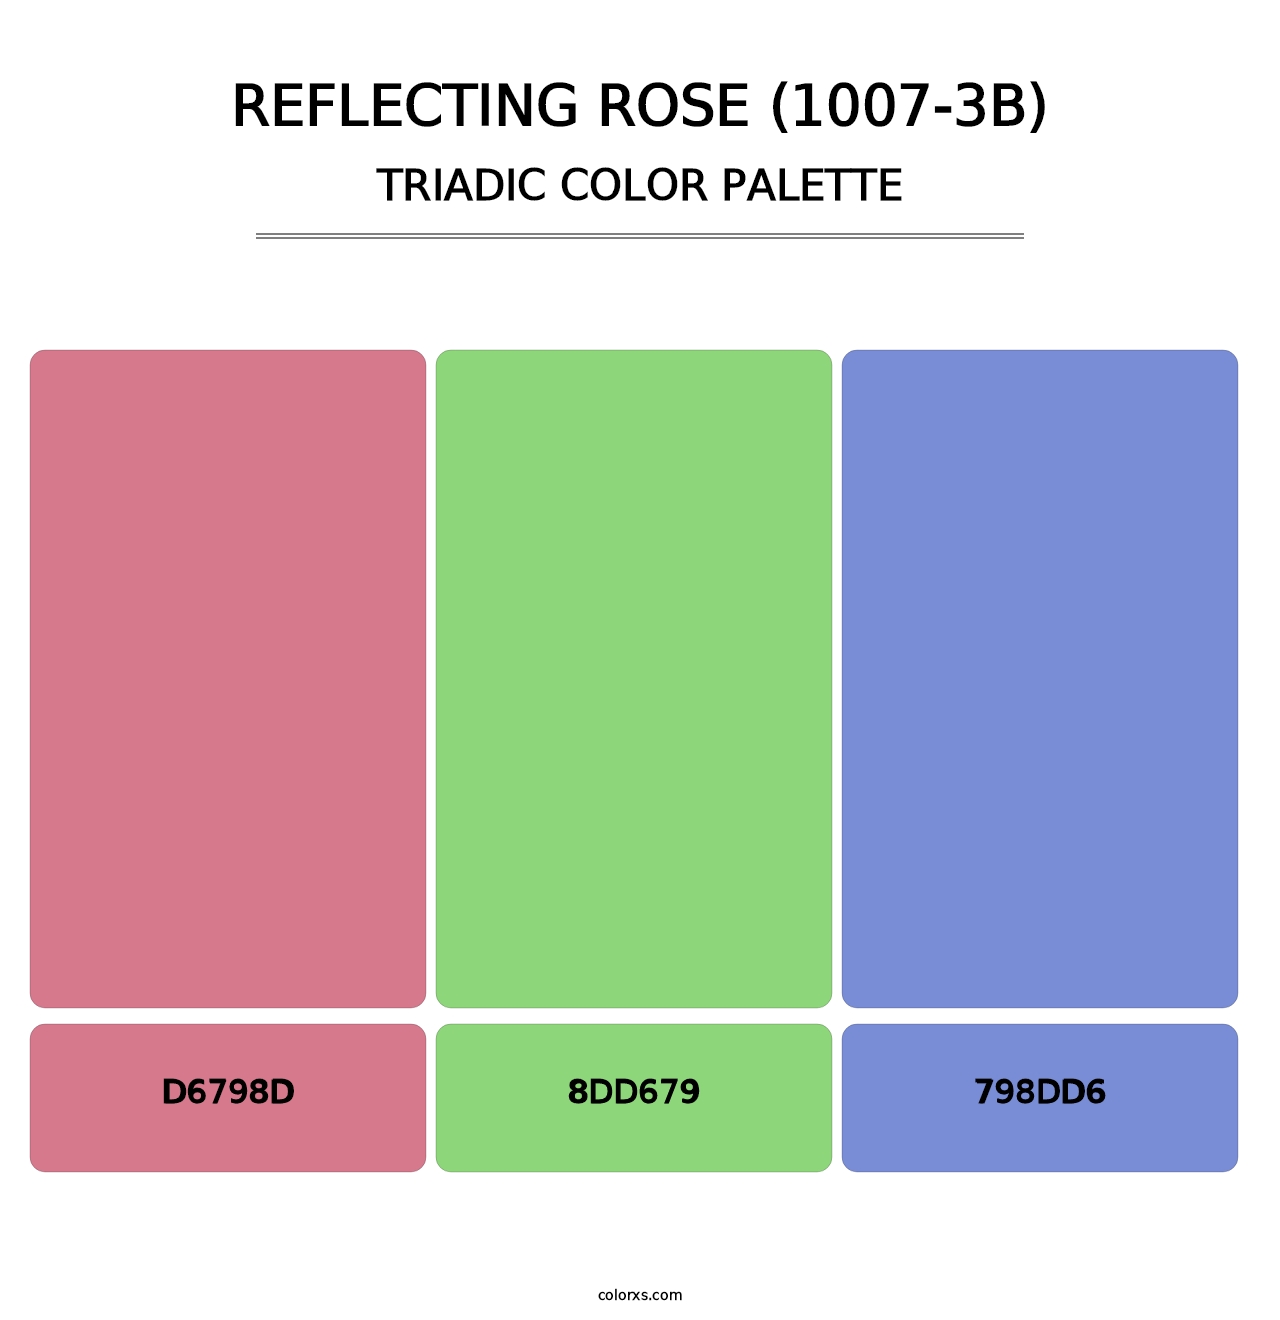 Reflecting Rose (1007-3B) - Triadic Color Palette